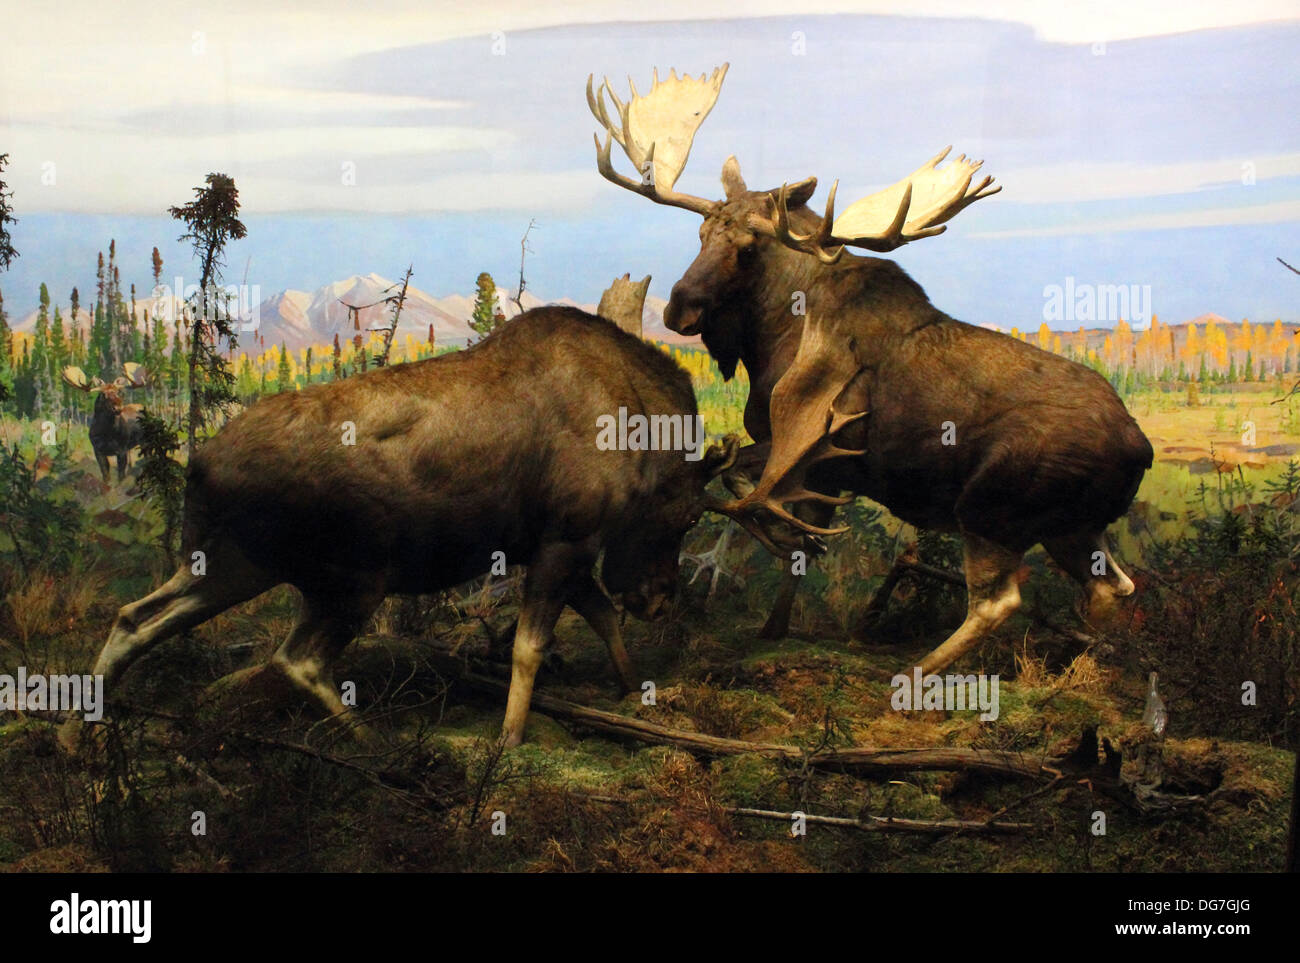 A diorama of two battling Moose displayed at the American Museum of Natural History in New York City. Stock Photo